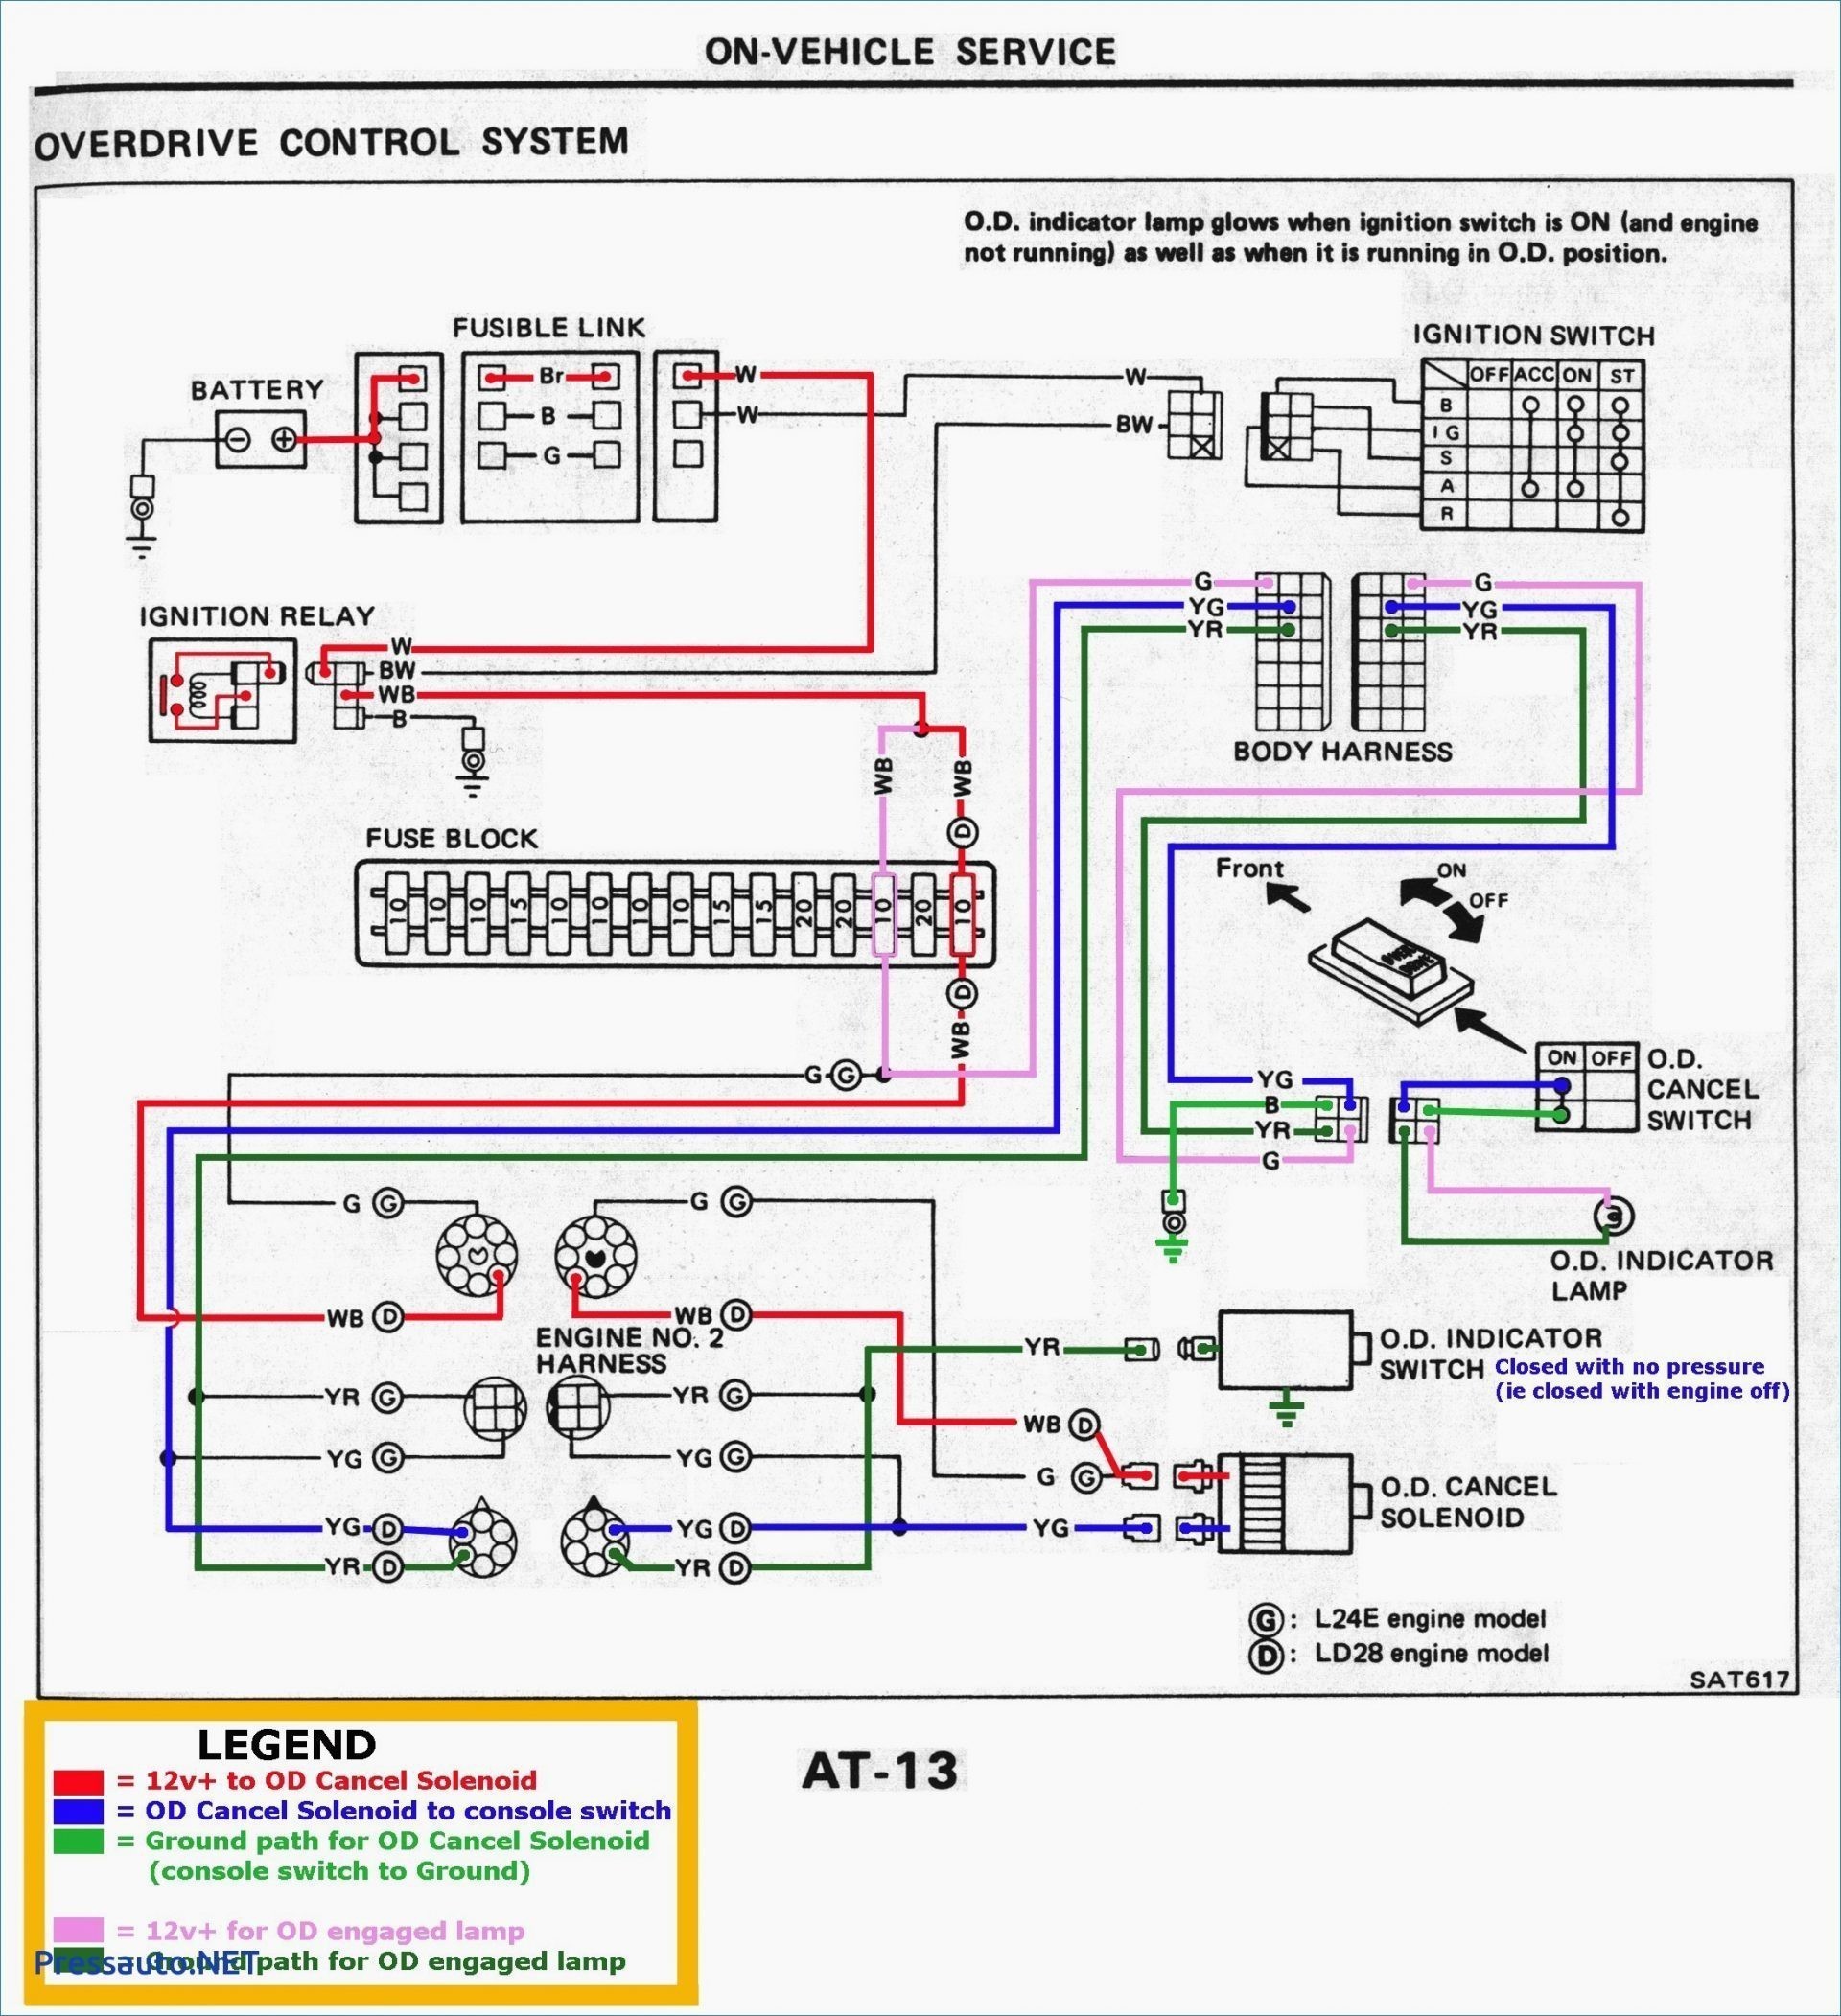 Simple House Wiring Diagram Wiring Diagram for Burglar Alarm System Fresh top Rated Home Of Simple House Wiring Diagram